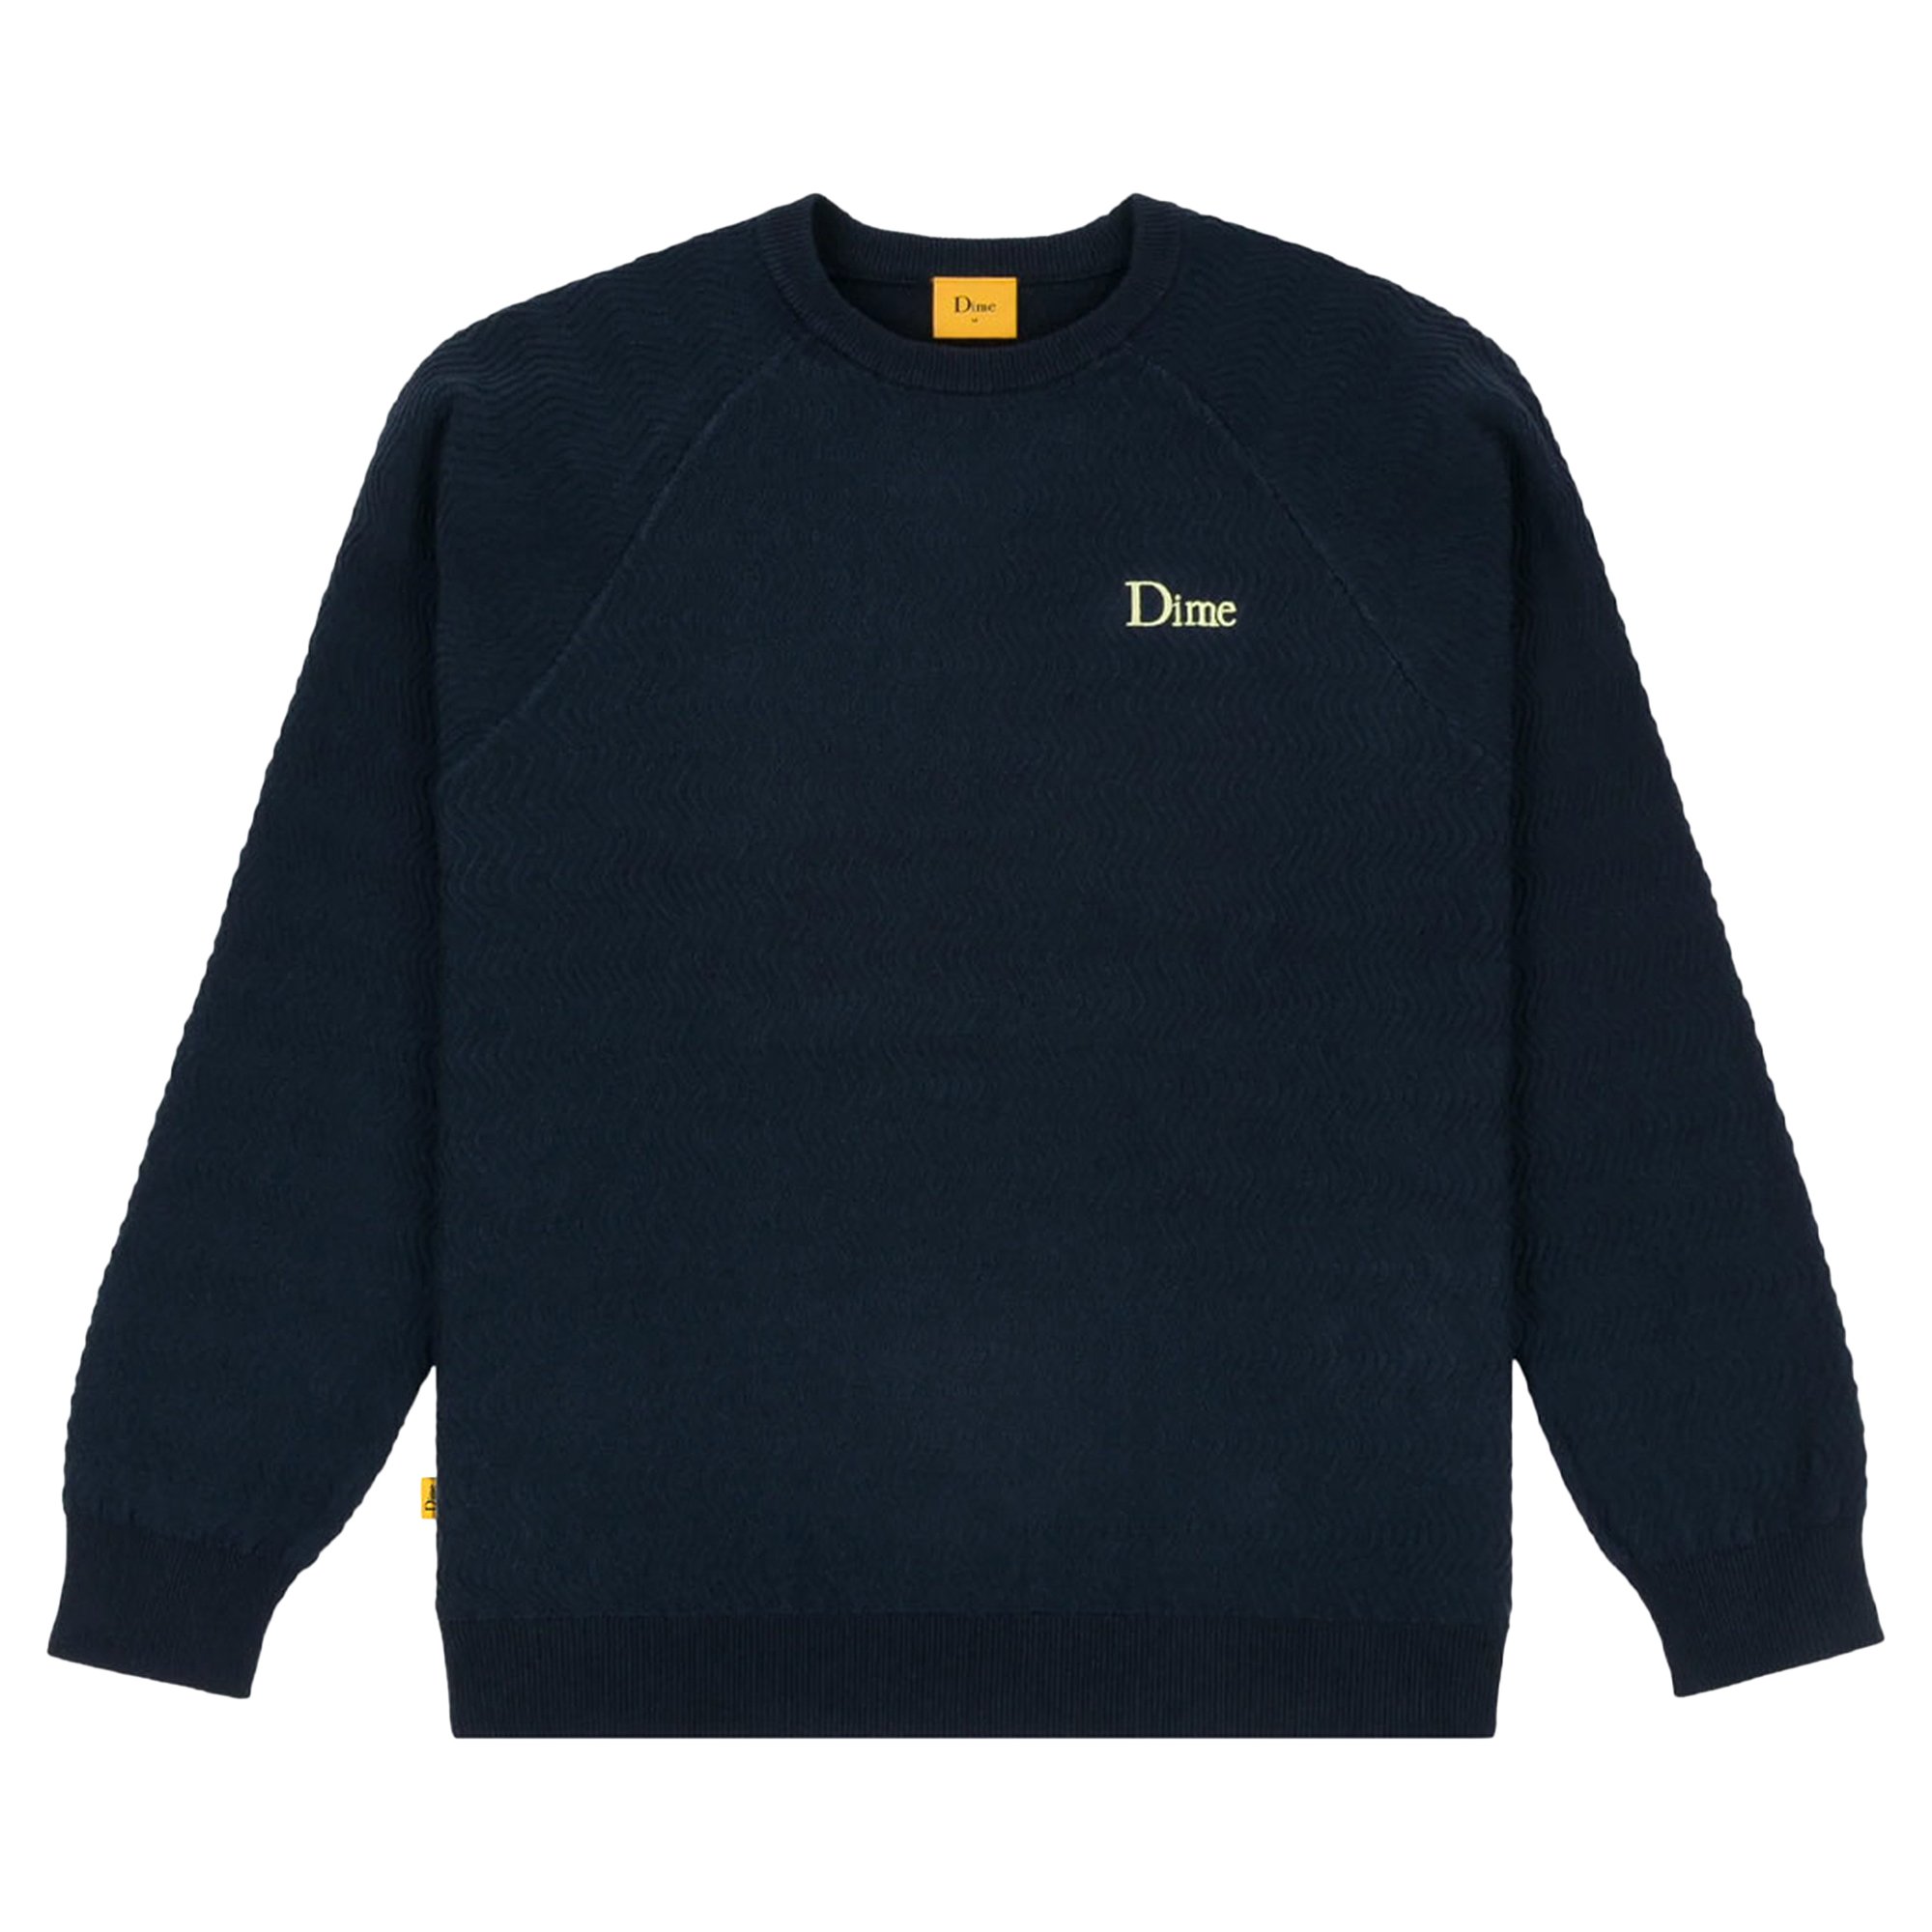 Buy Dime Wave Cable Knit Sweater 'Navy' - DIMEF5NVY | GOAT